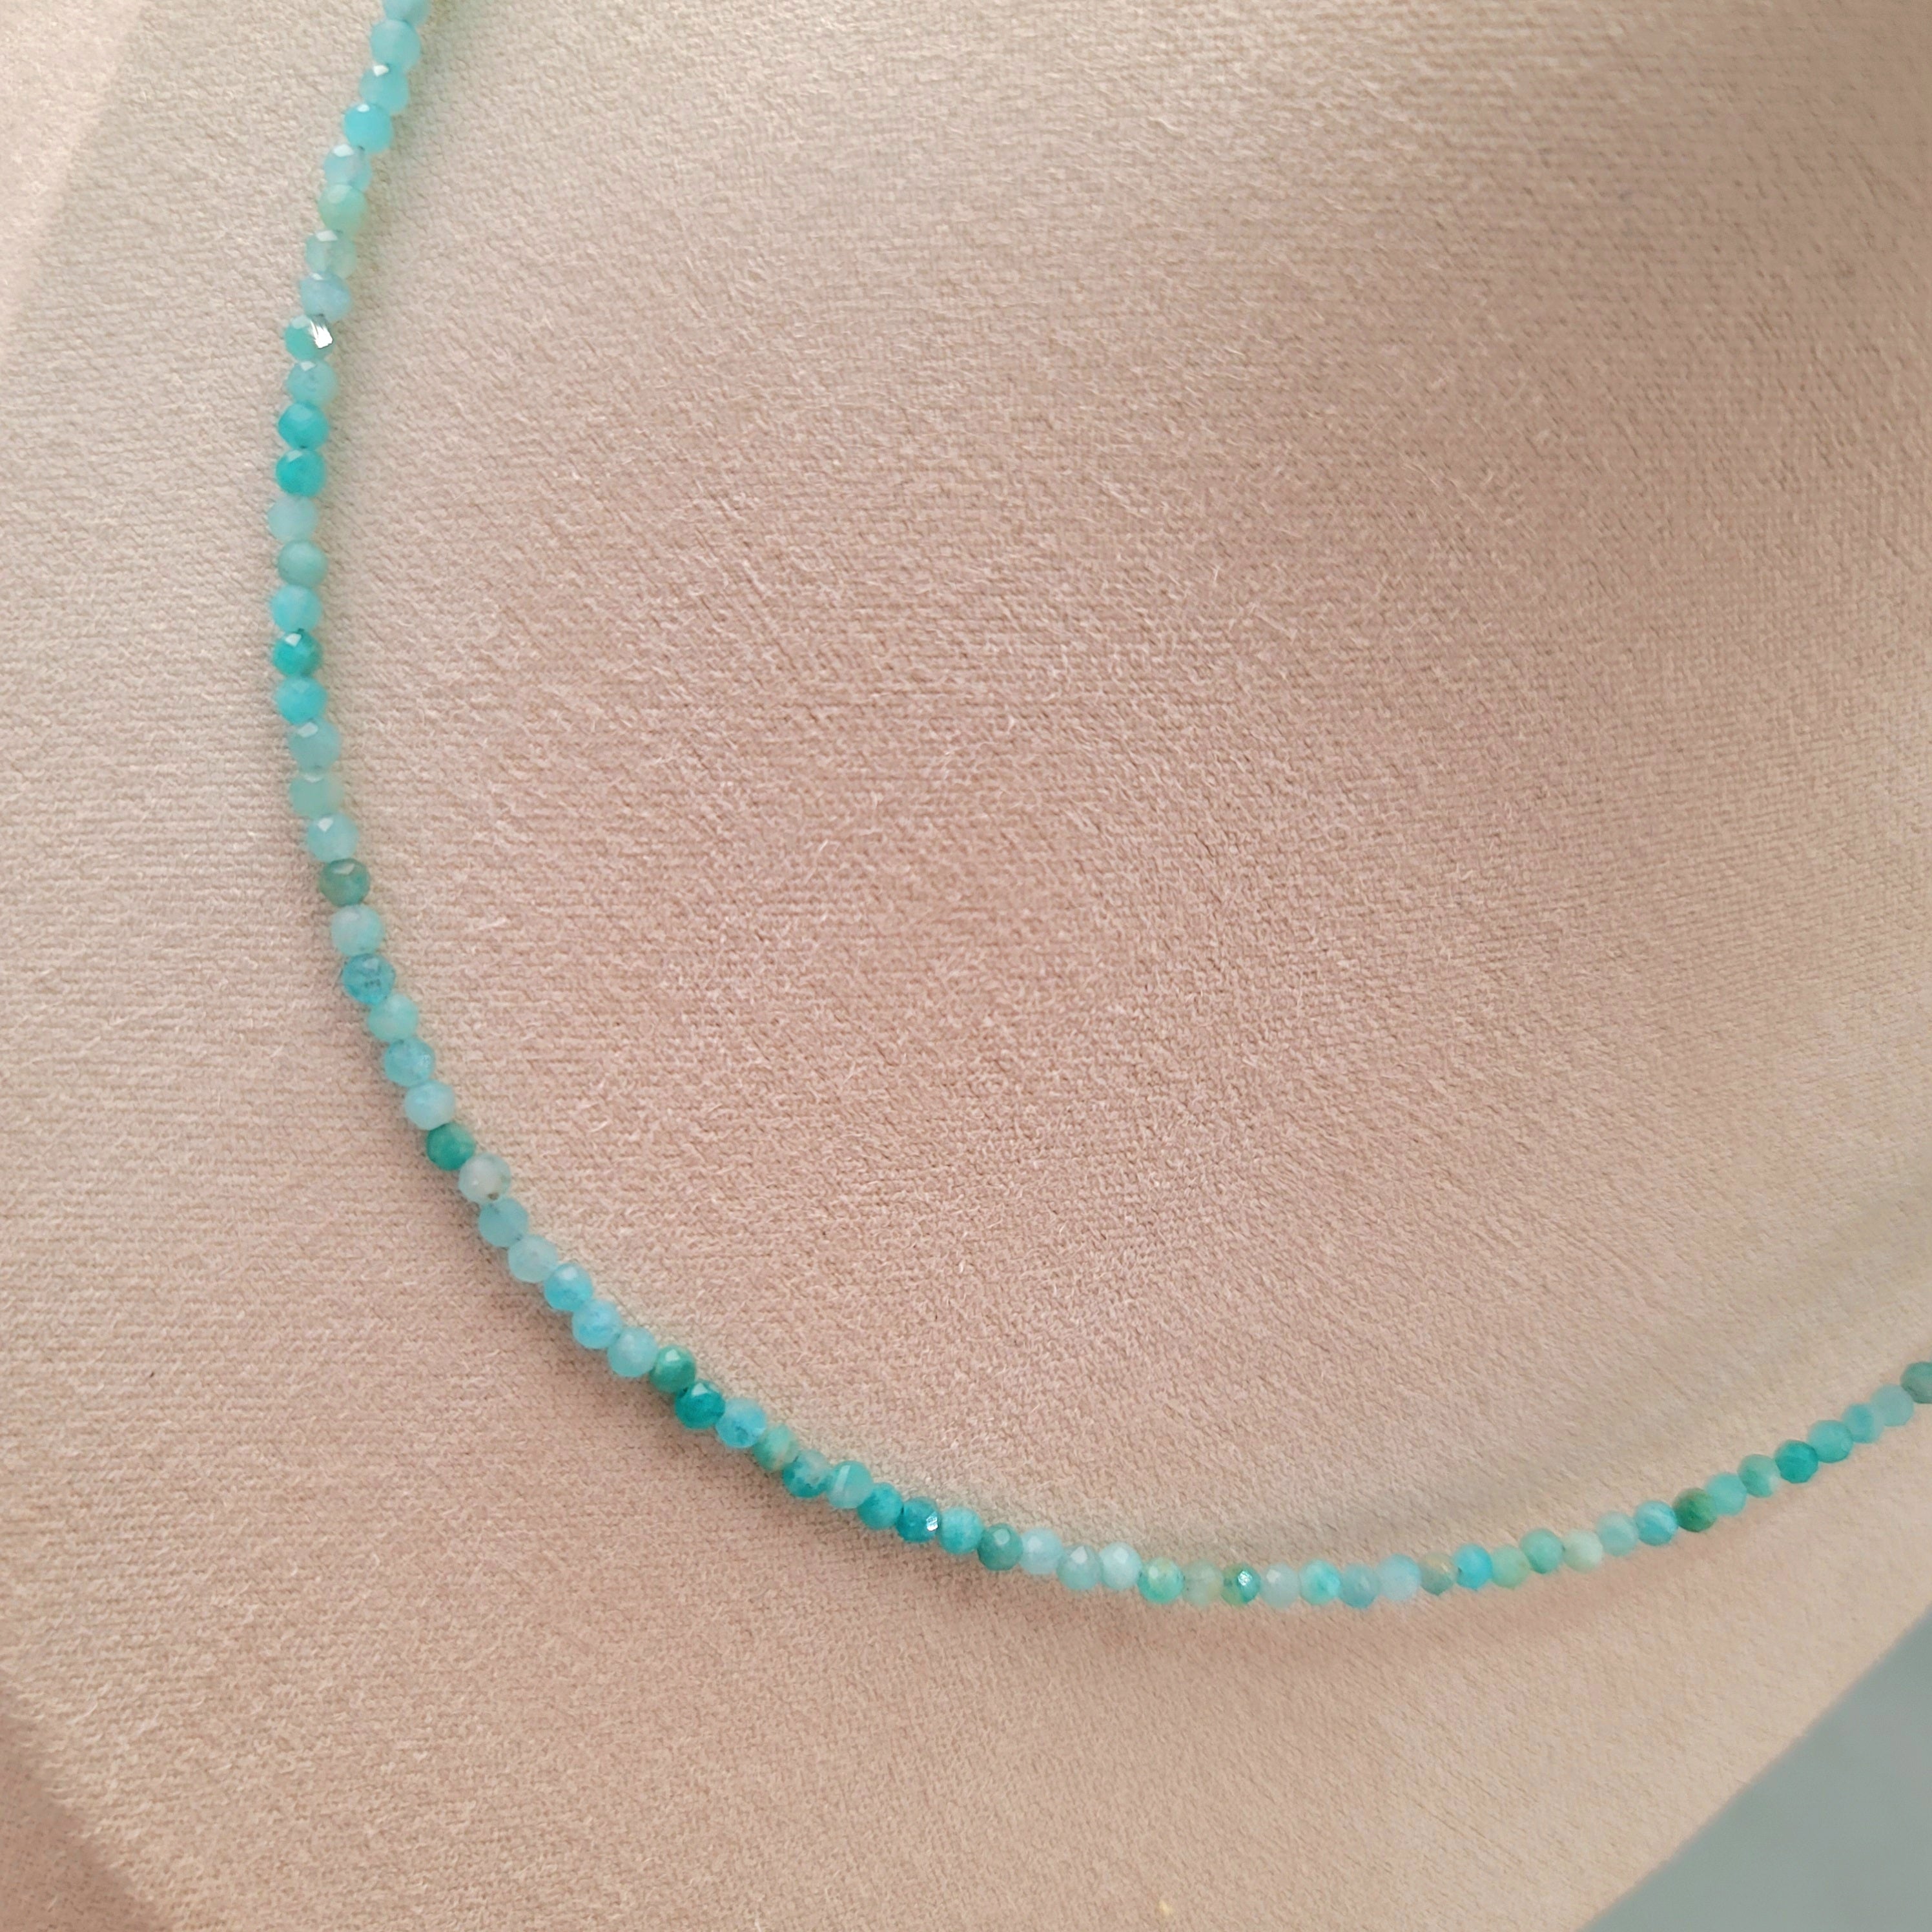 Amazonite Micro Faceted Choker/Layering Necklace for Personal Truth & Enhancing Harmony, Hope & Joy 